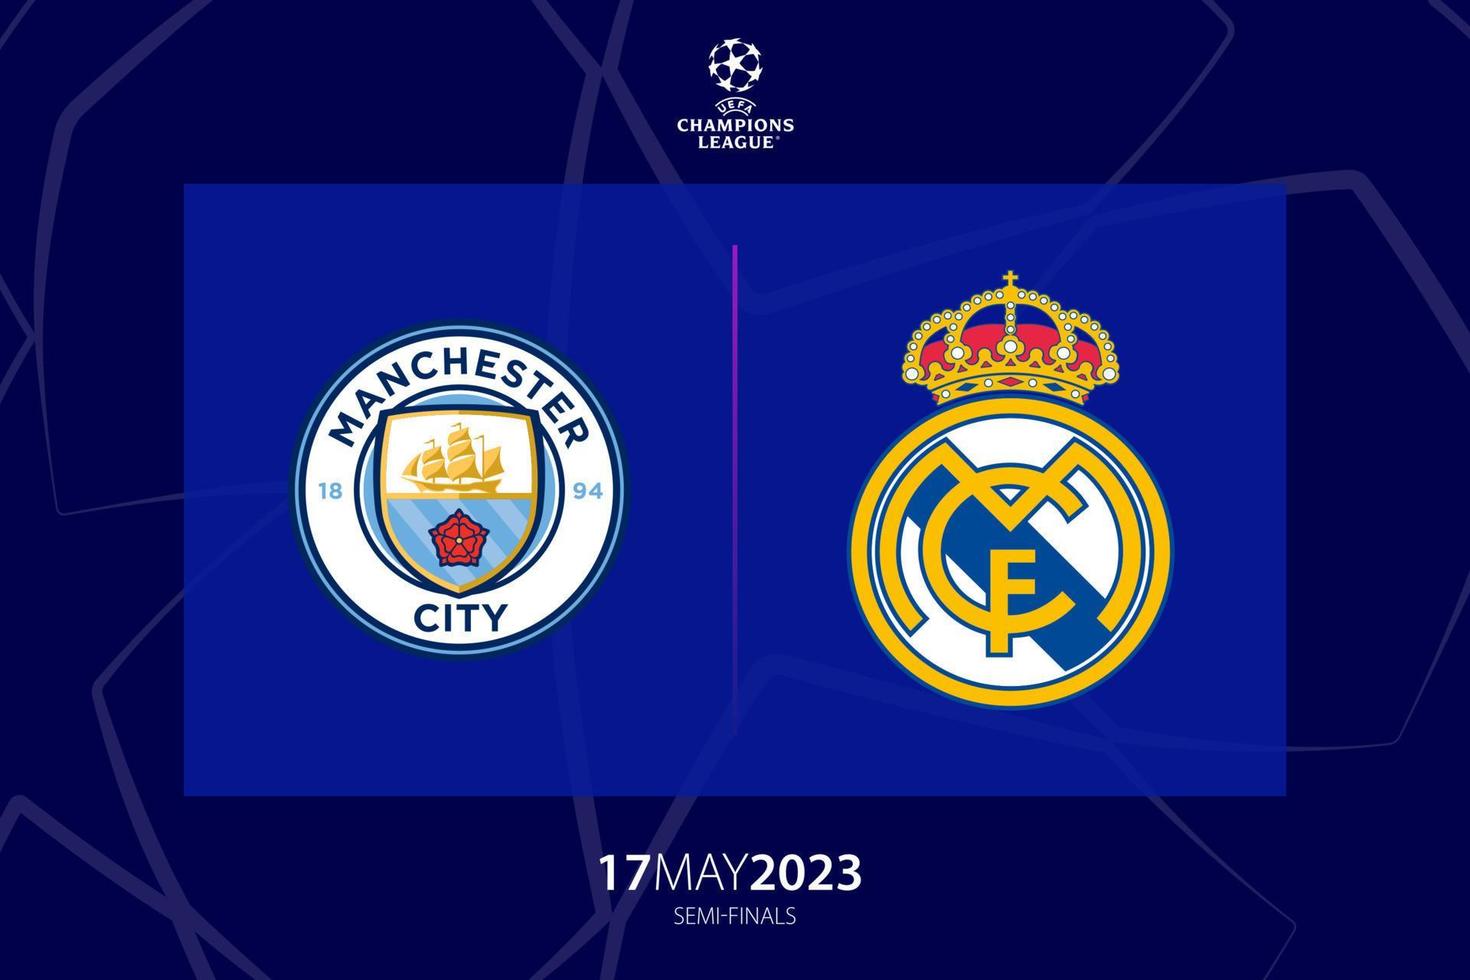 UEFA Champions League 2023 semi-final between Manchester City versus Real Madrid, game two. Tbilisi, Georgia - April 20, 2023. vector